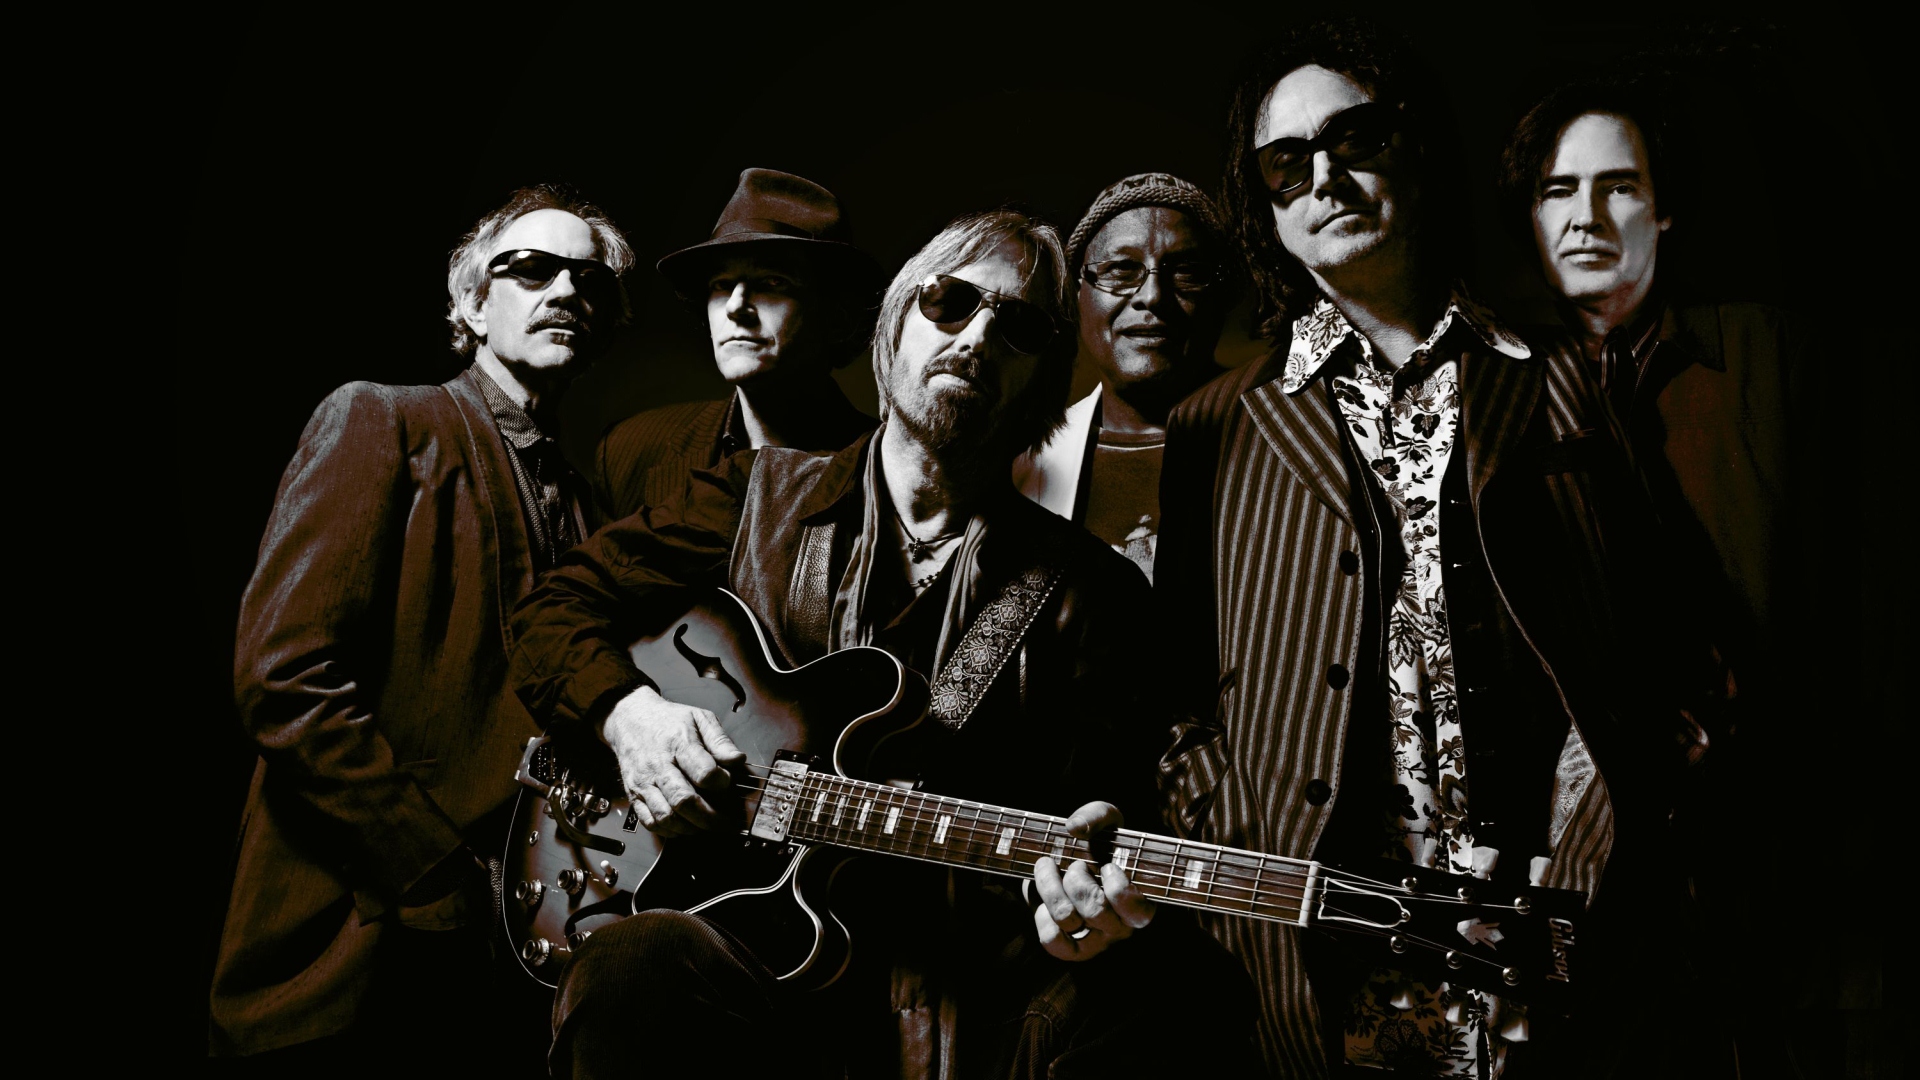 Tom Petty and The Heartbreakers backdrop wallpaper